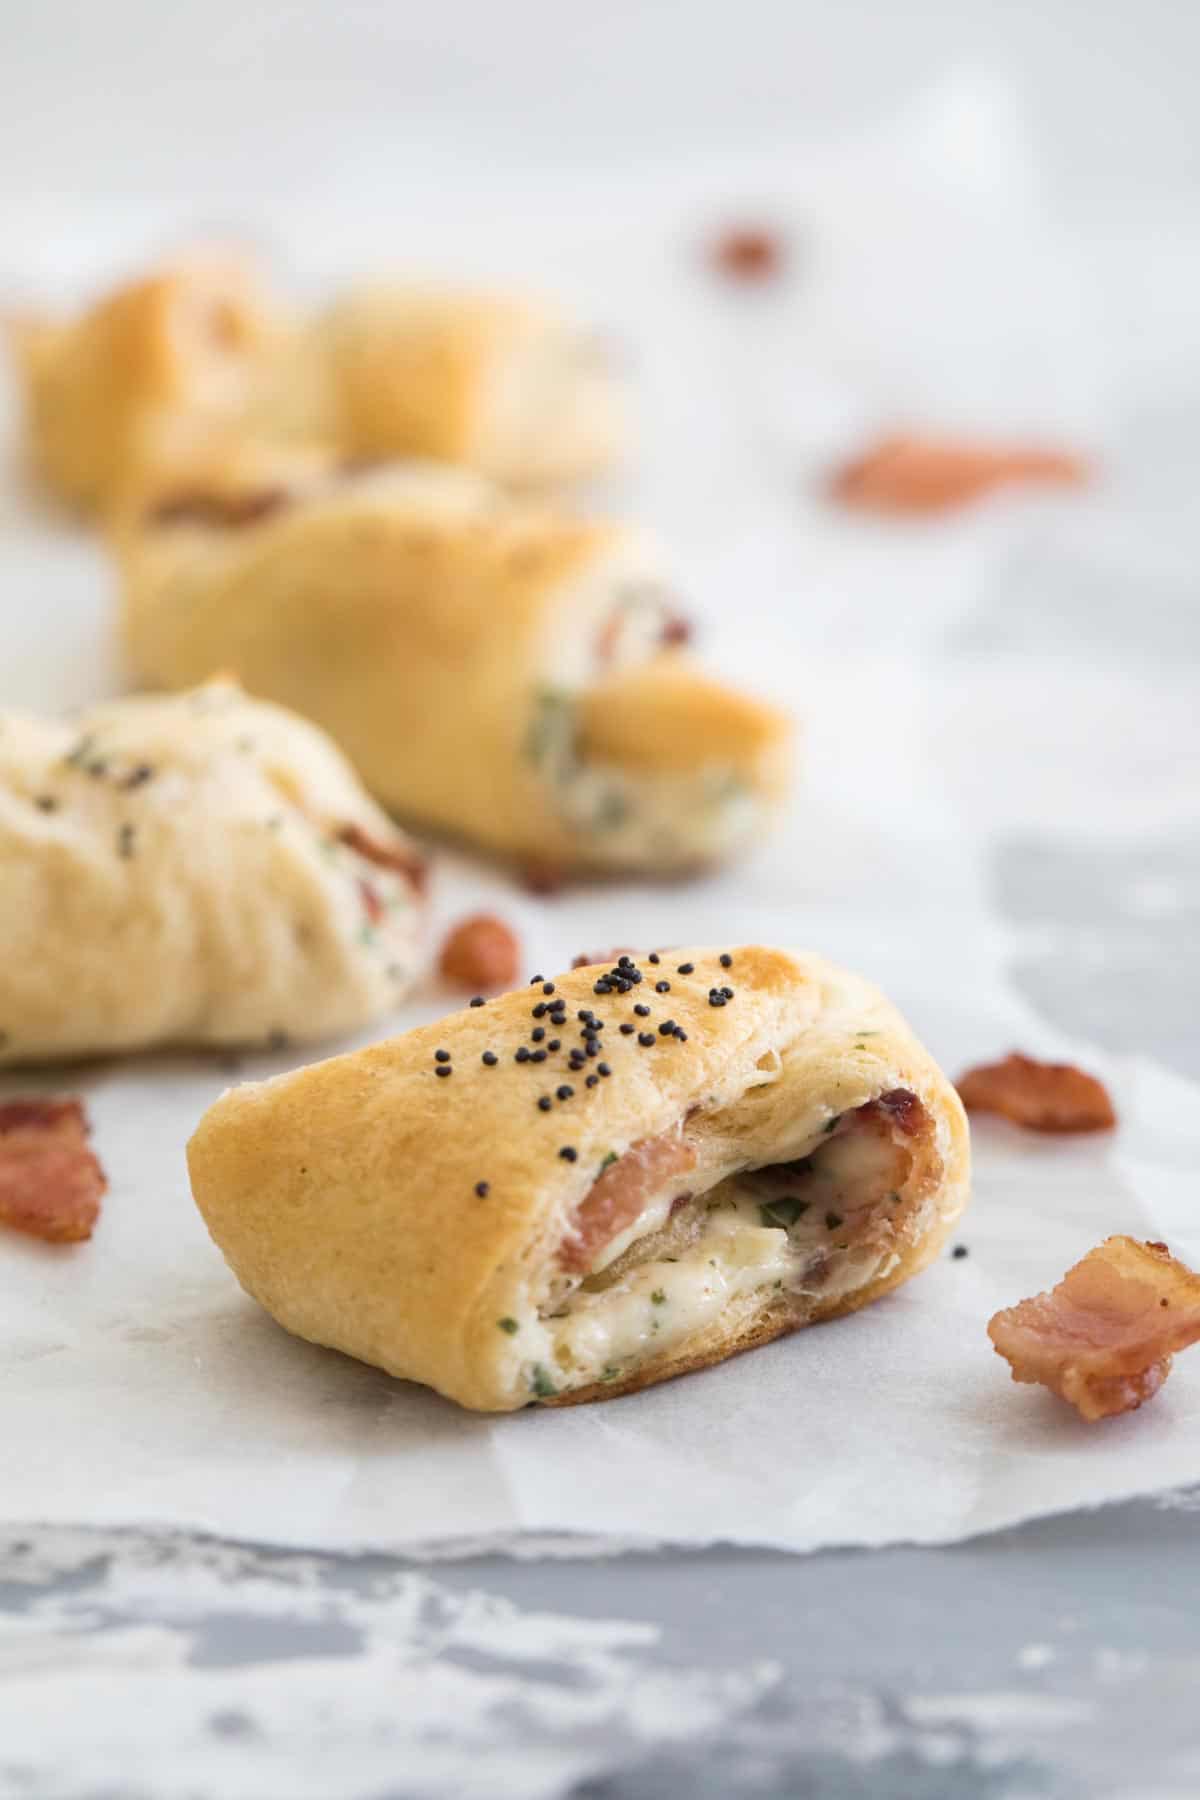 Bacon and Cream Cheese Crescent Appetizer cut open showing filling.